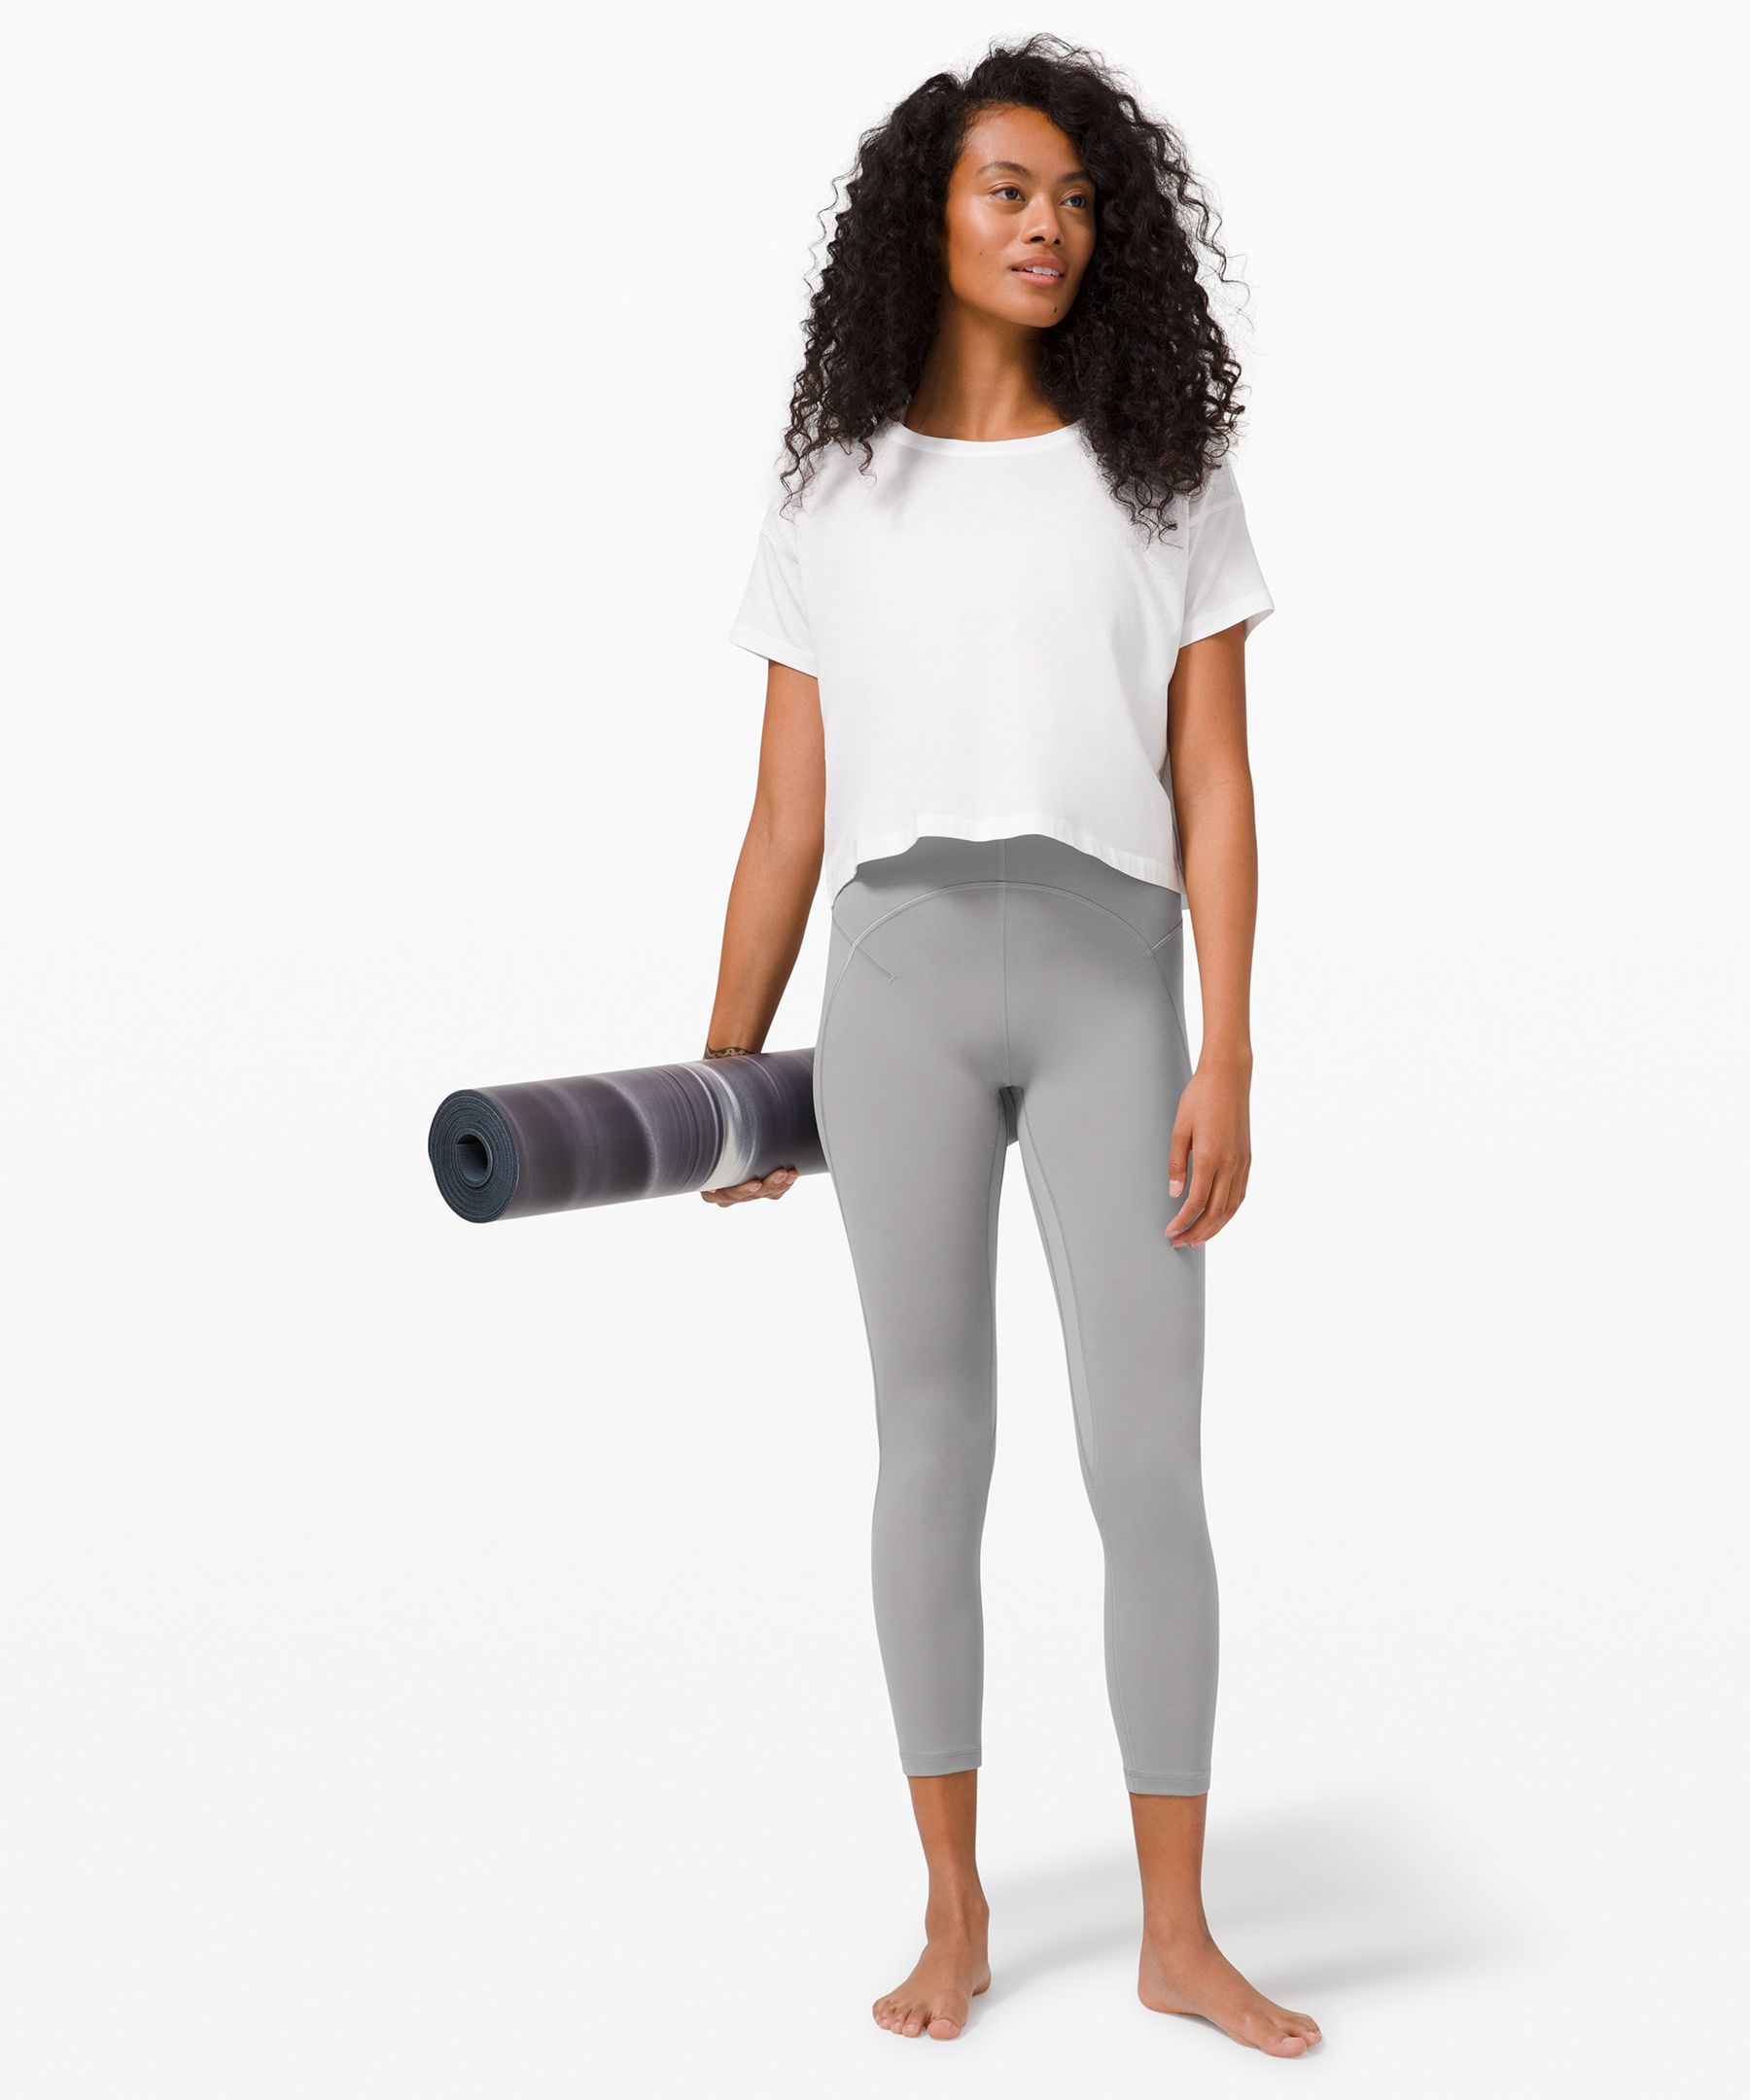 This look is so popular now. I'm just wondering why Lululemon hasn't done a crossover  leggings style like these in the align fabric? I want and need! : r/ lululemon